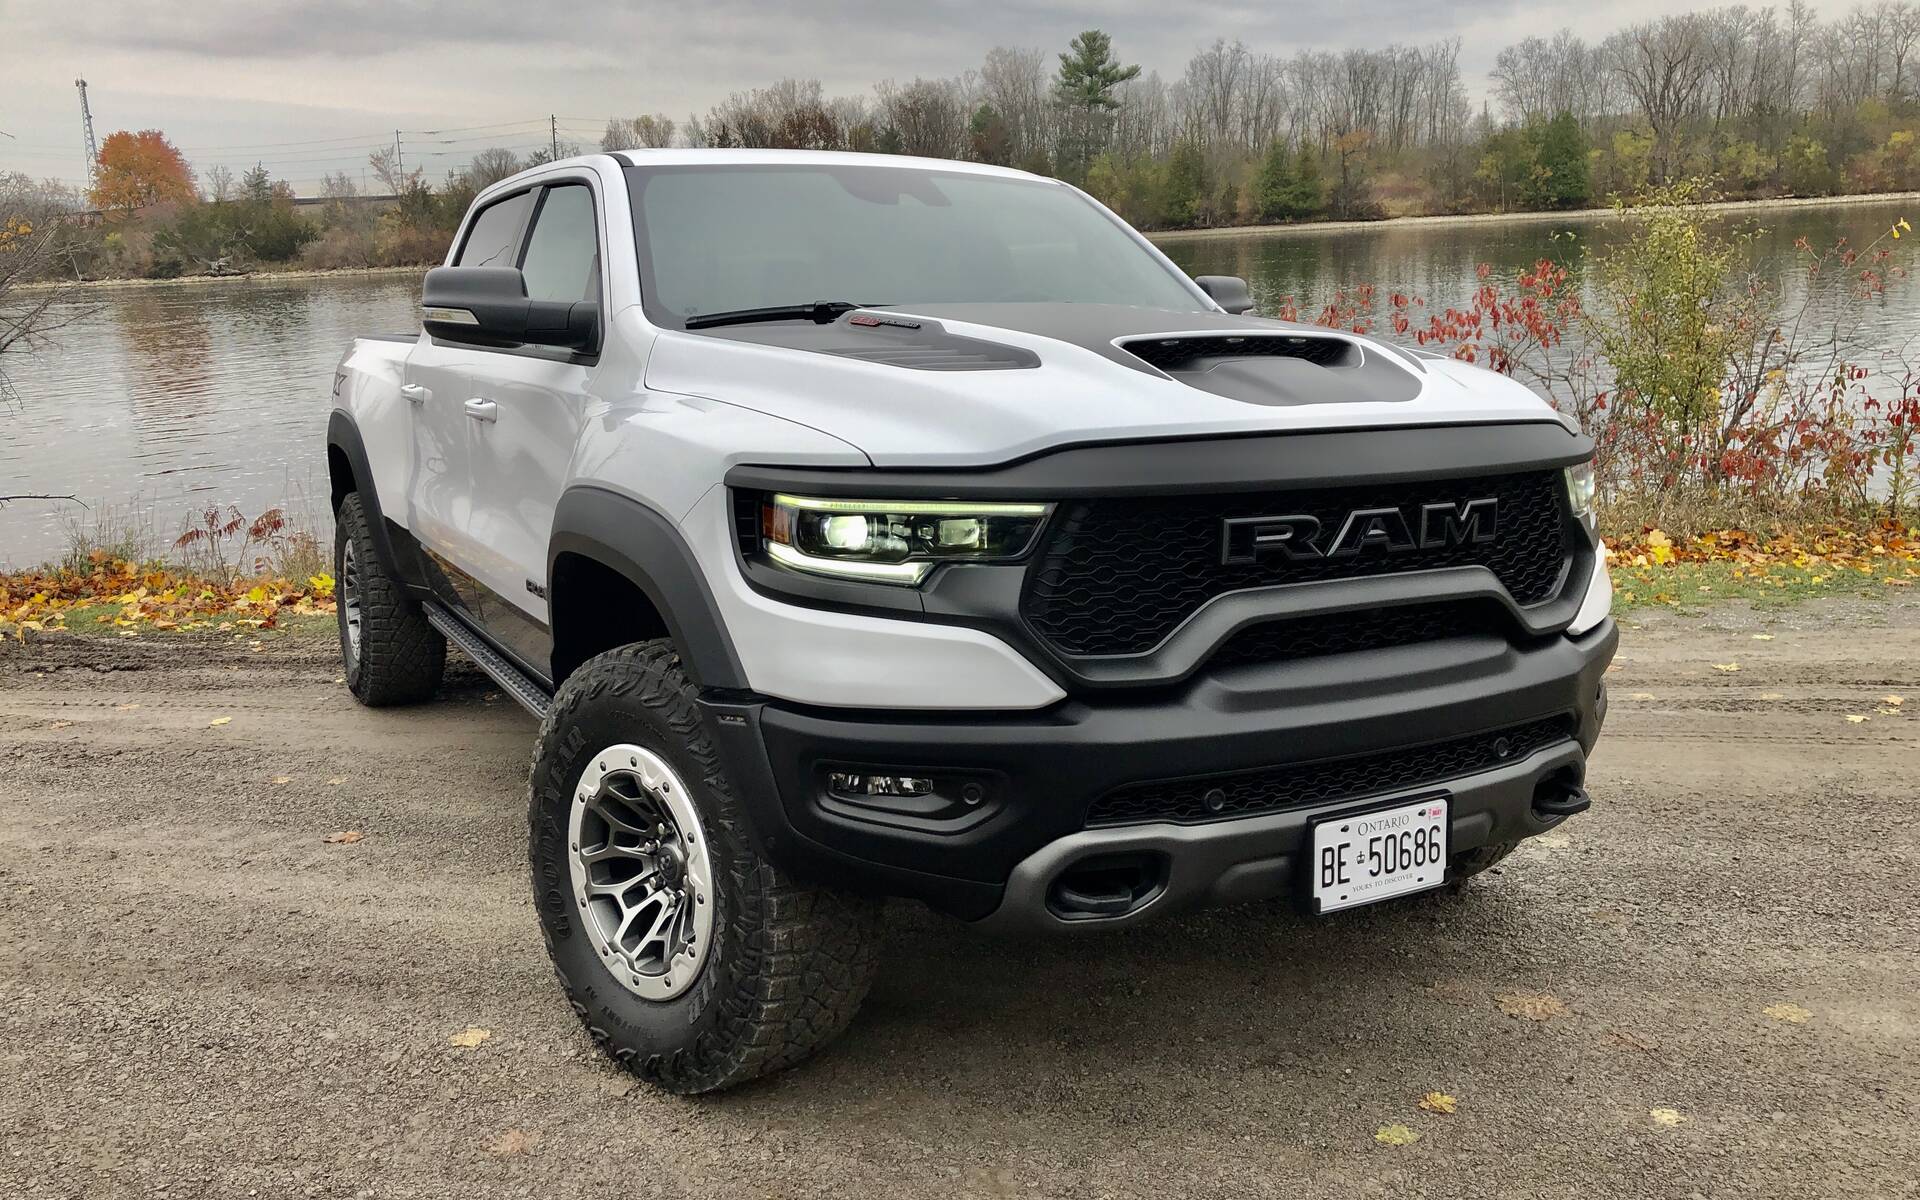 2021 Ram 1500 Trx Think Really Really Big The Car Guide